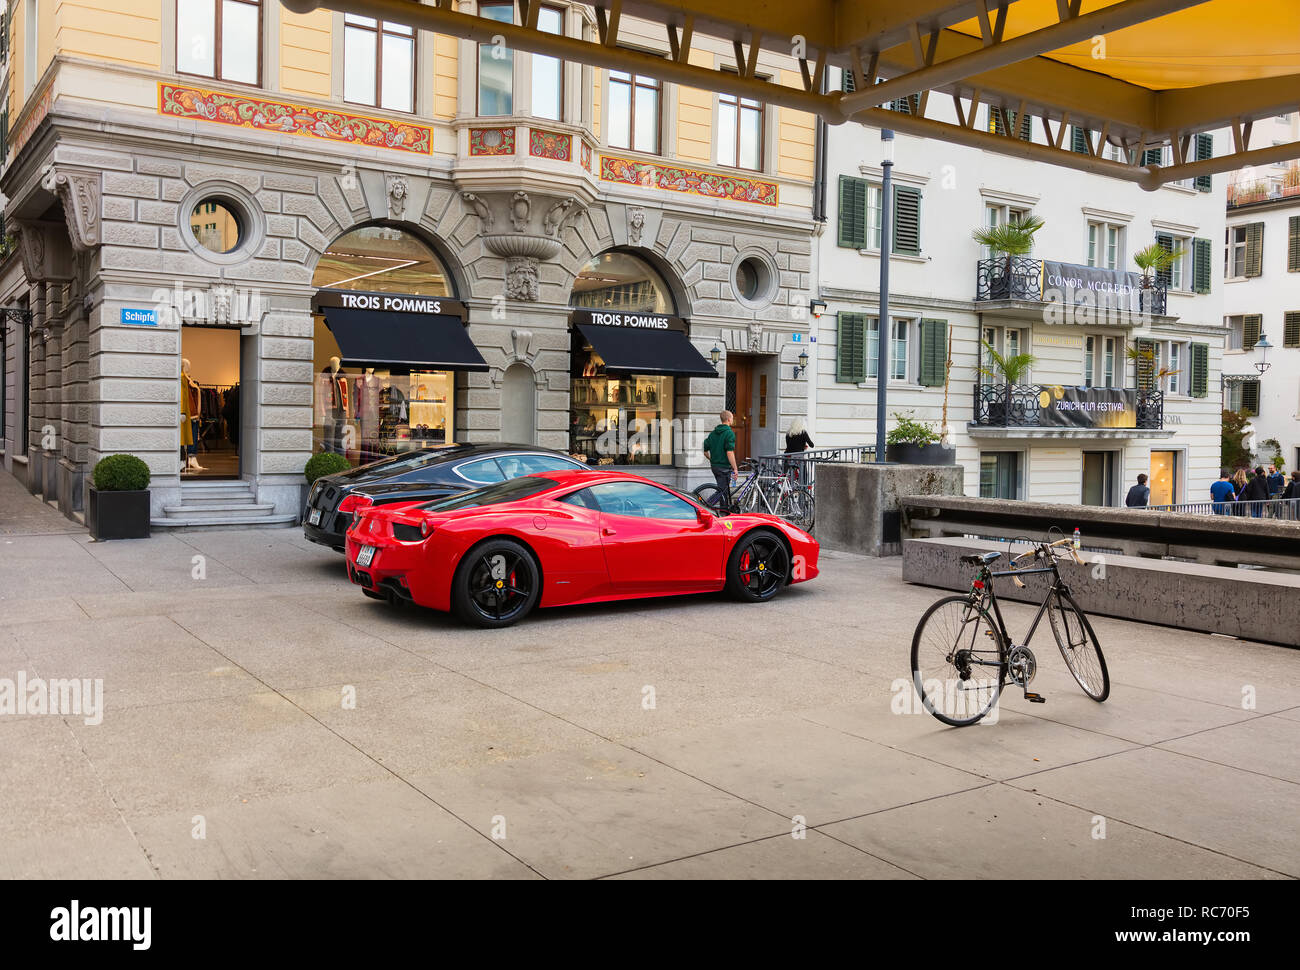 a-red-ferrari-parked-side-by-side-with-a-black-bentley-in-the-old-town-of-the-city-of-zurich-RC70F5.jpg